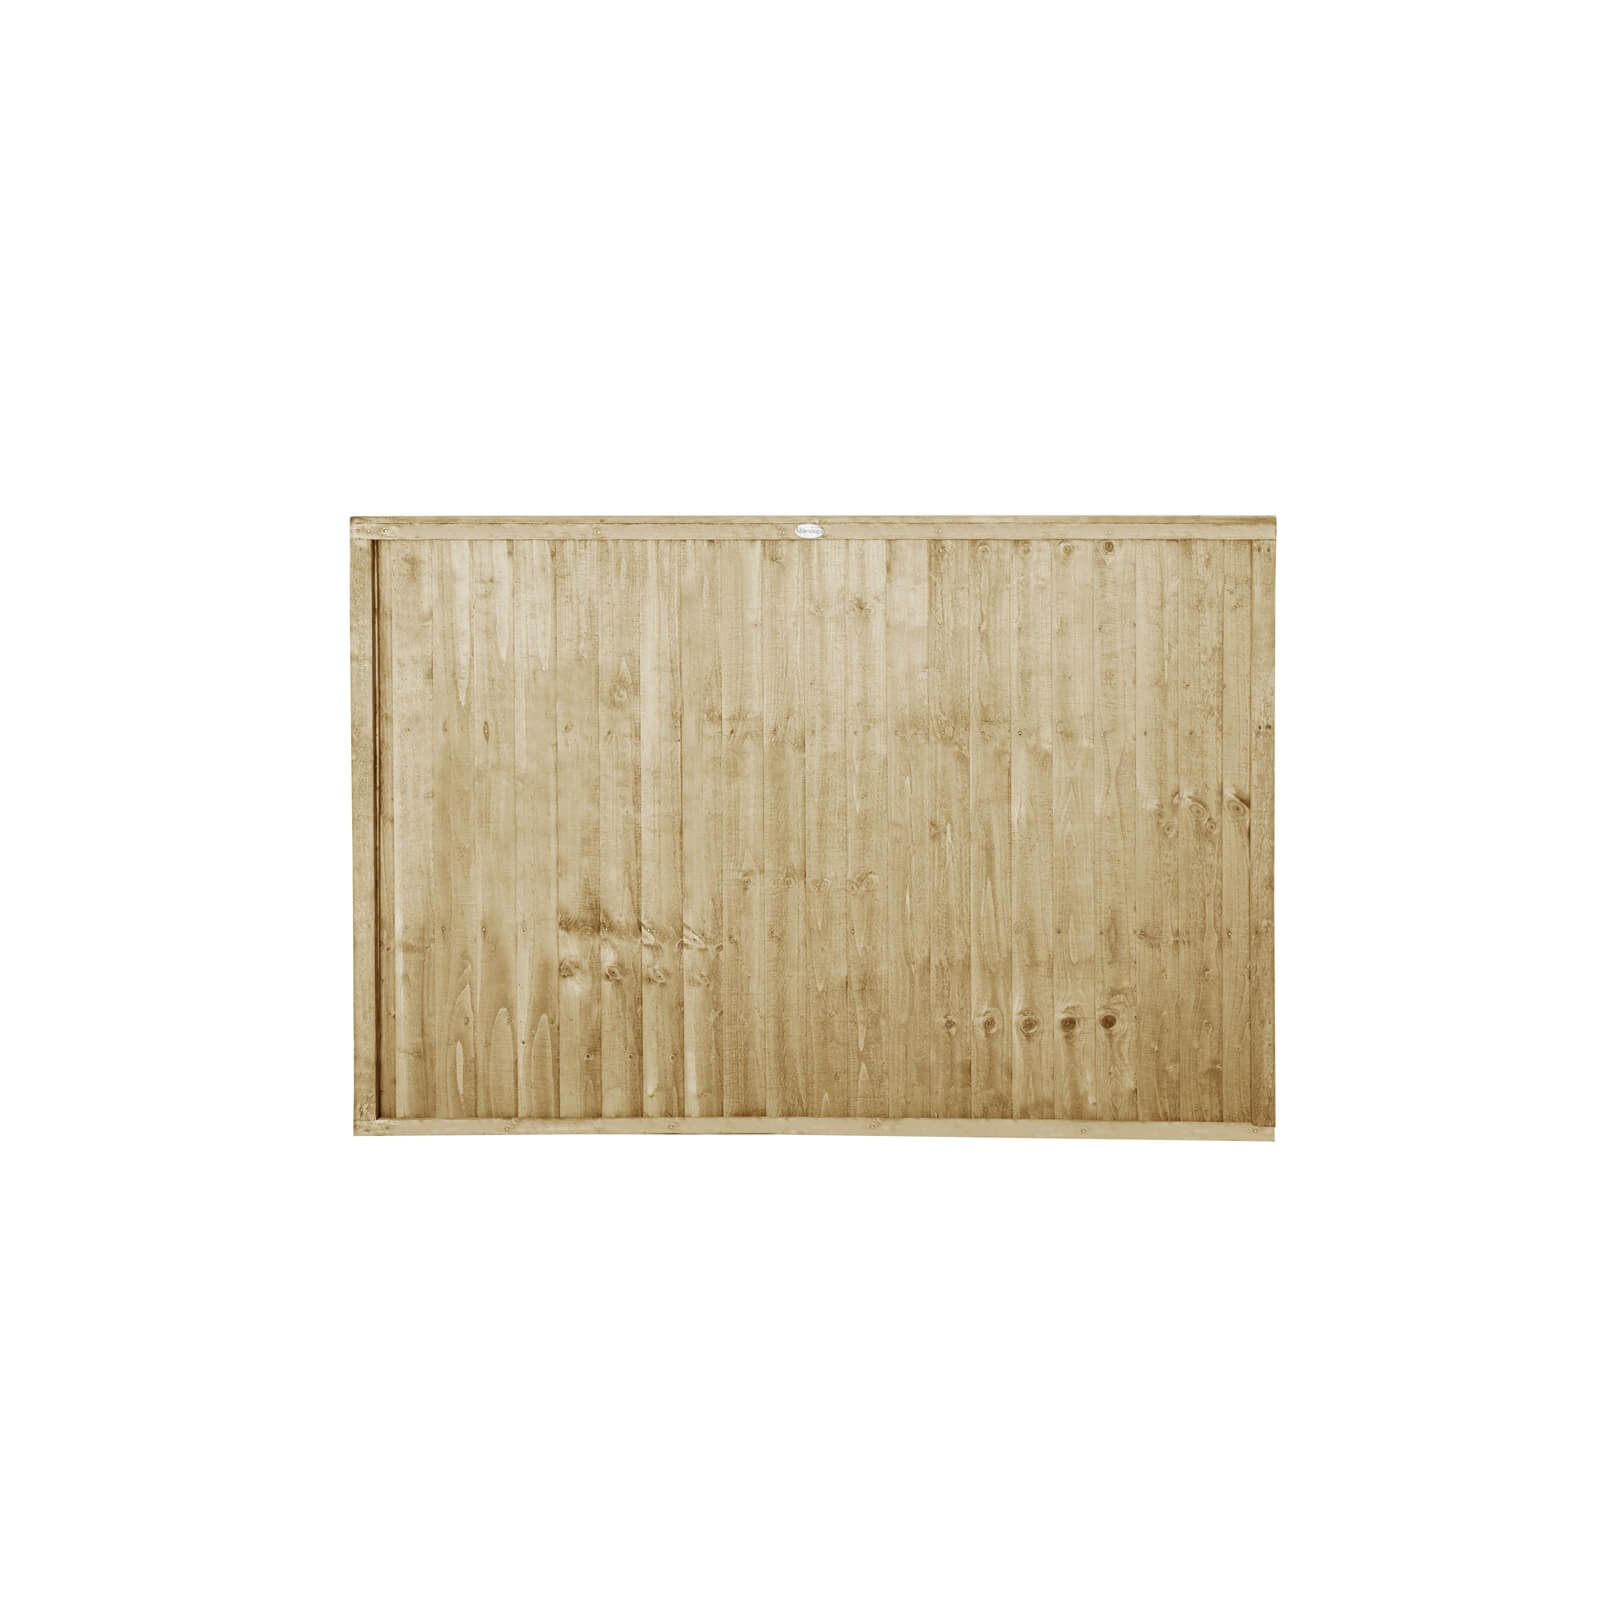 6ft x 4ft (1.83m x 1.22m) Pressure Treated Closeboard Fence Panel - Pack of 4